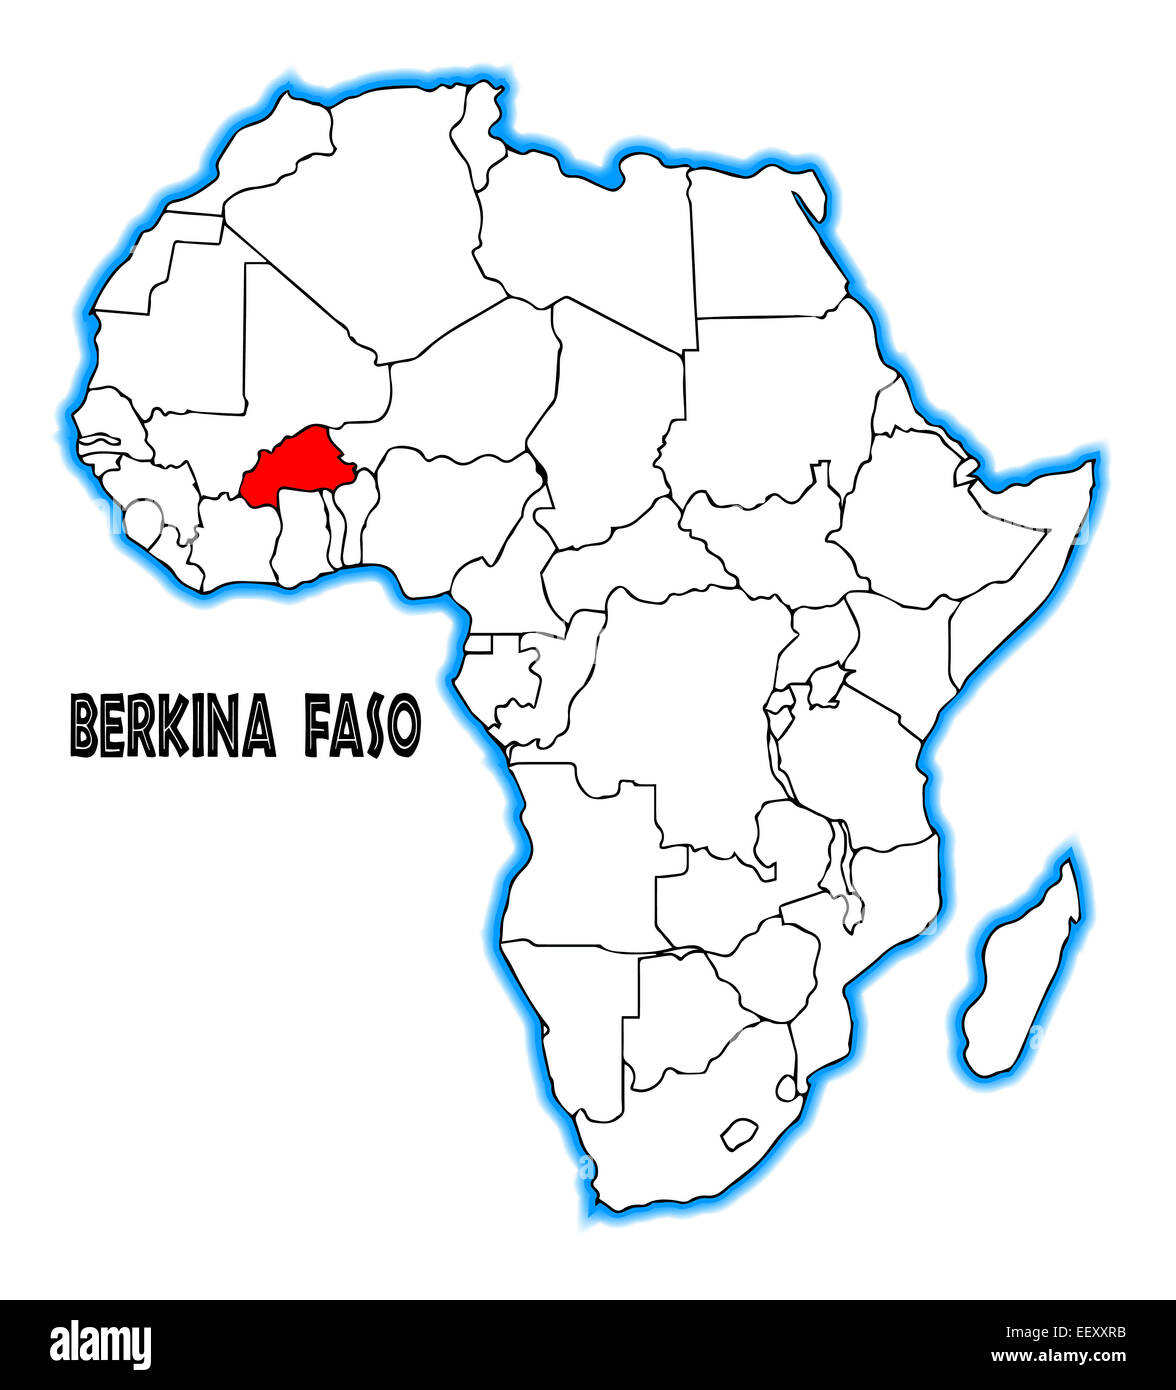 Burkina Faso outline inset into a map of Africa over a white background  Stock Photo - Alamy